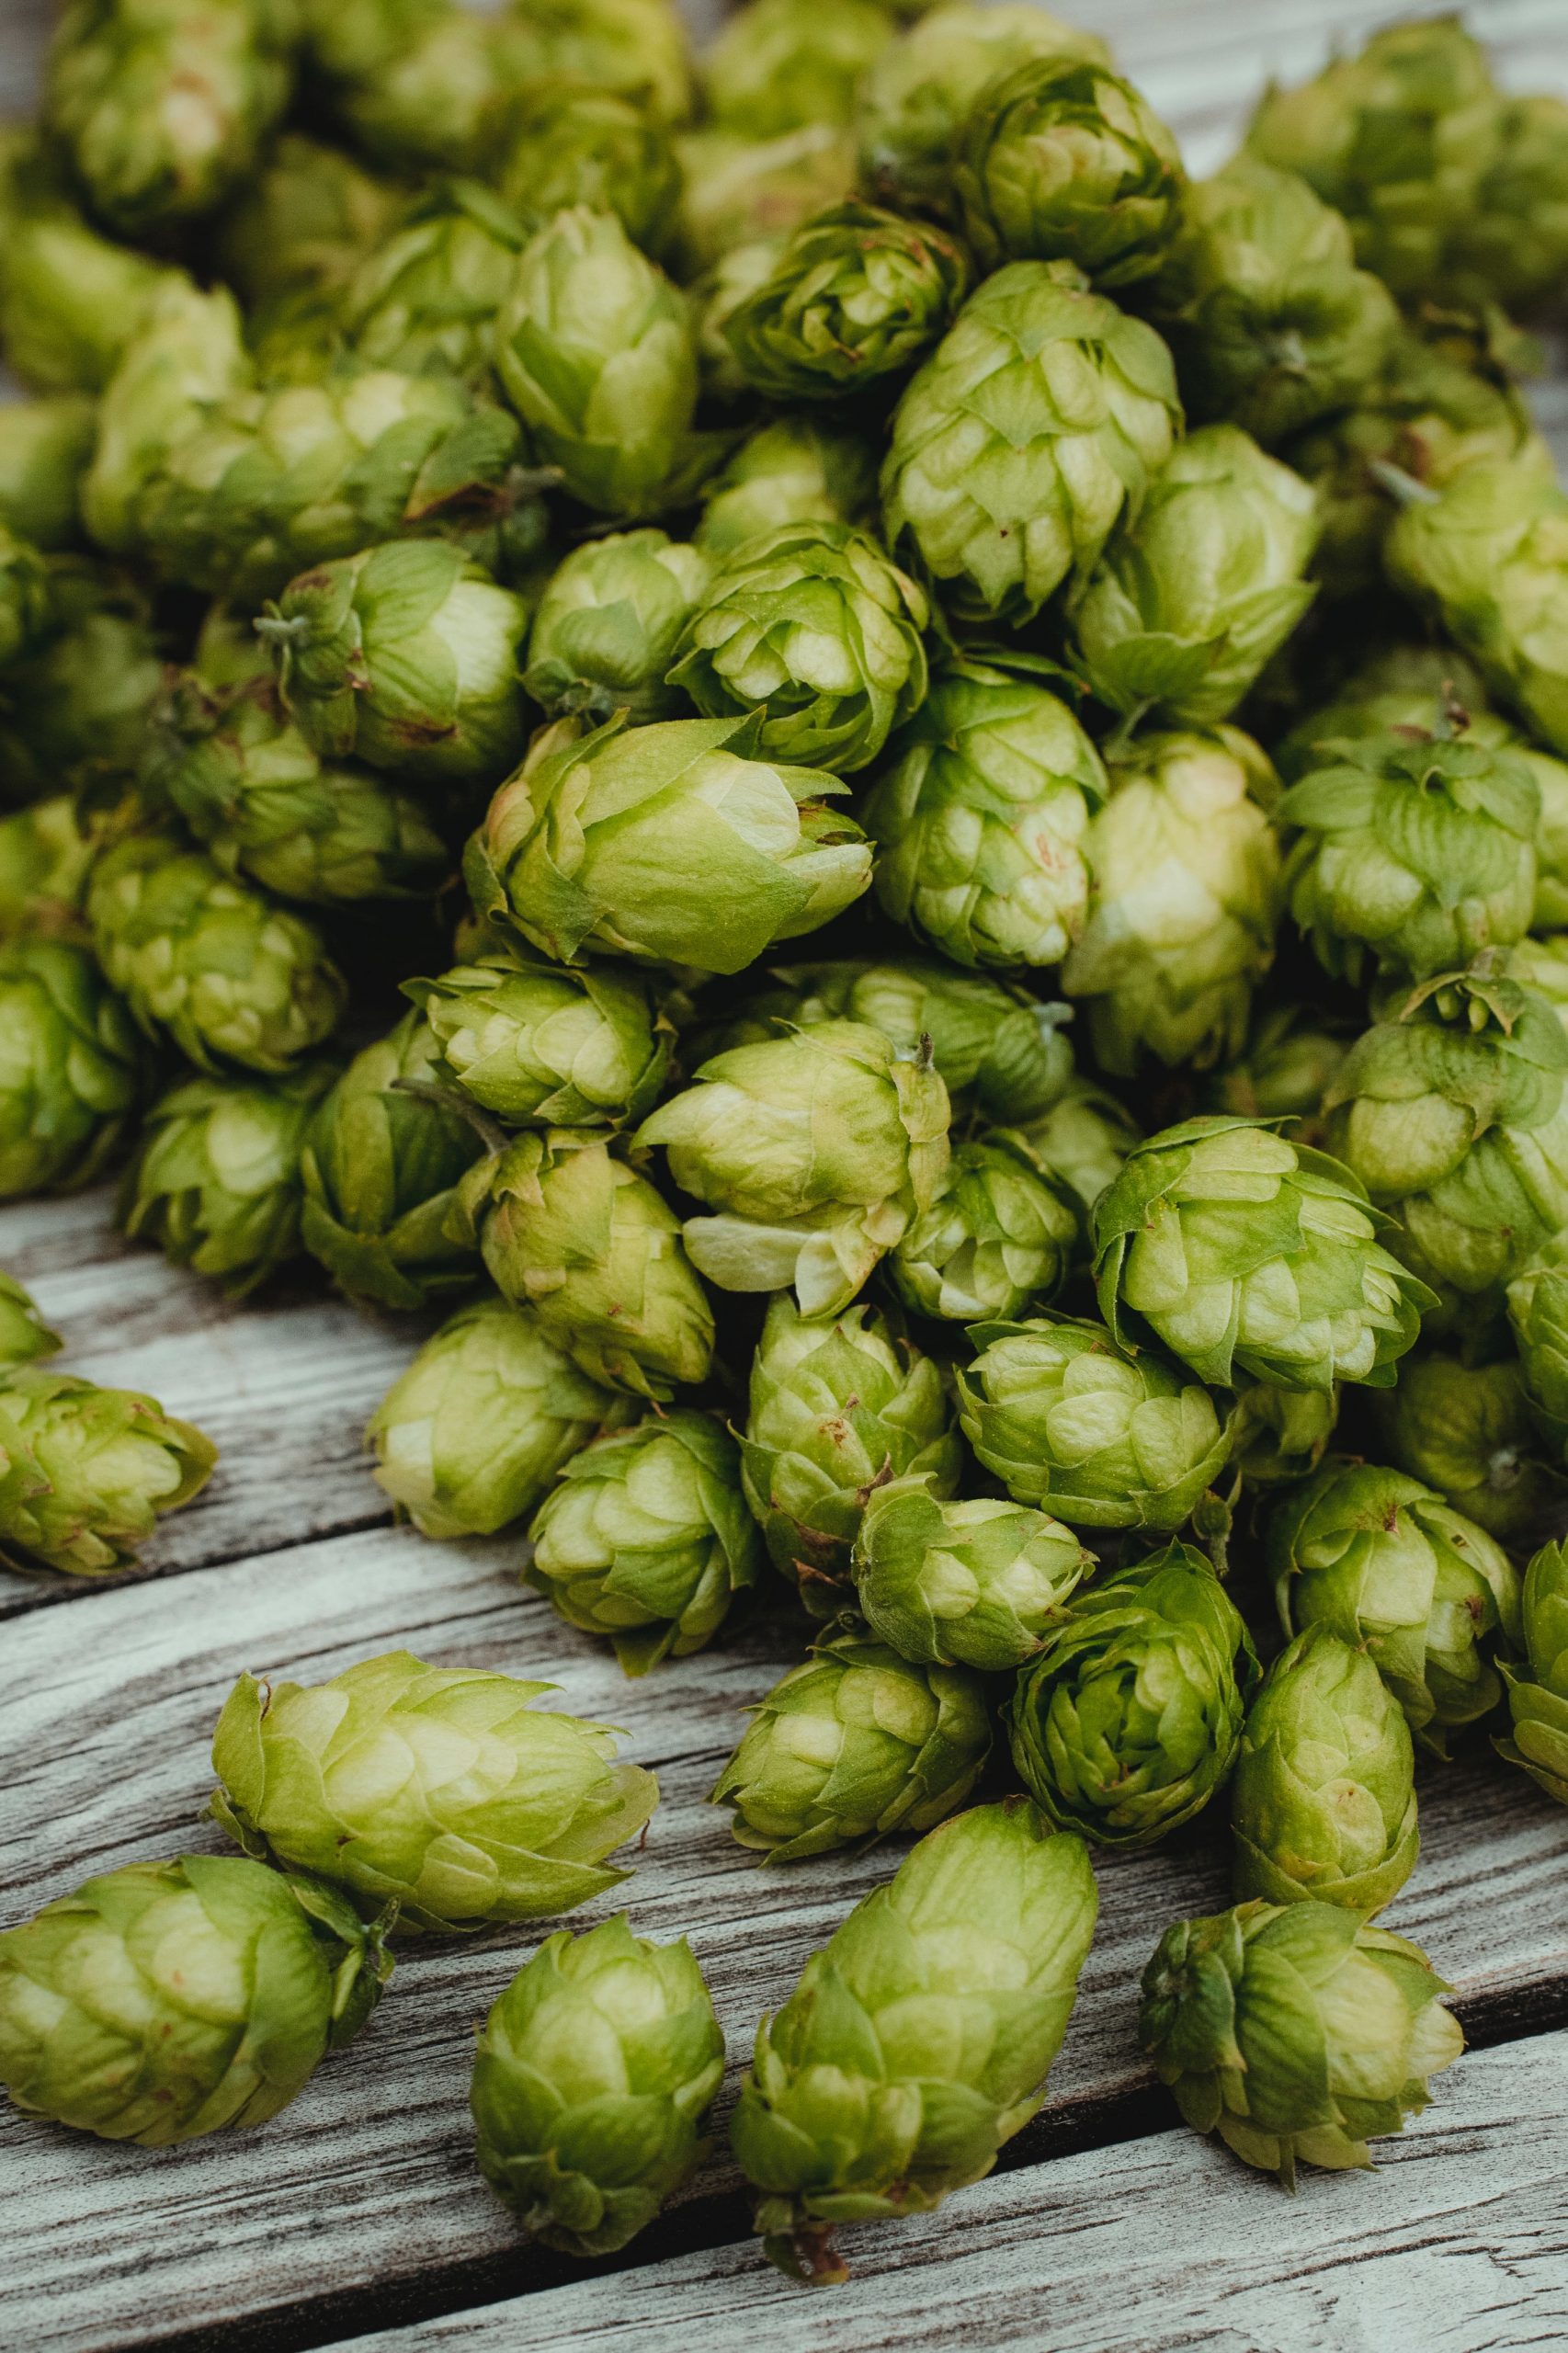 How Much Can You Harvest From One Hops Plant?